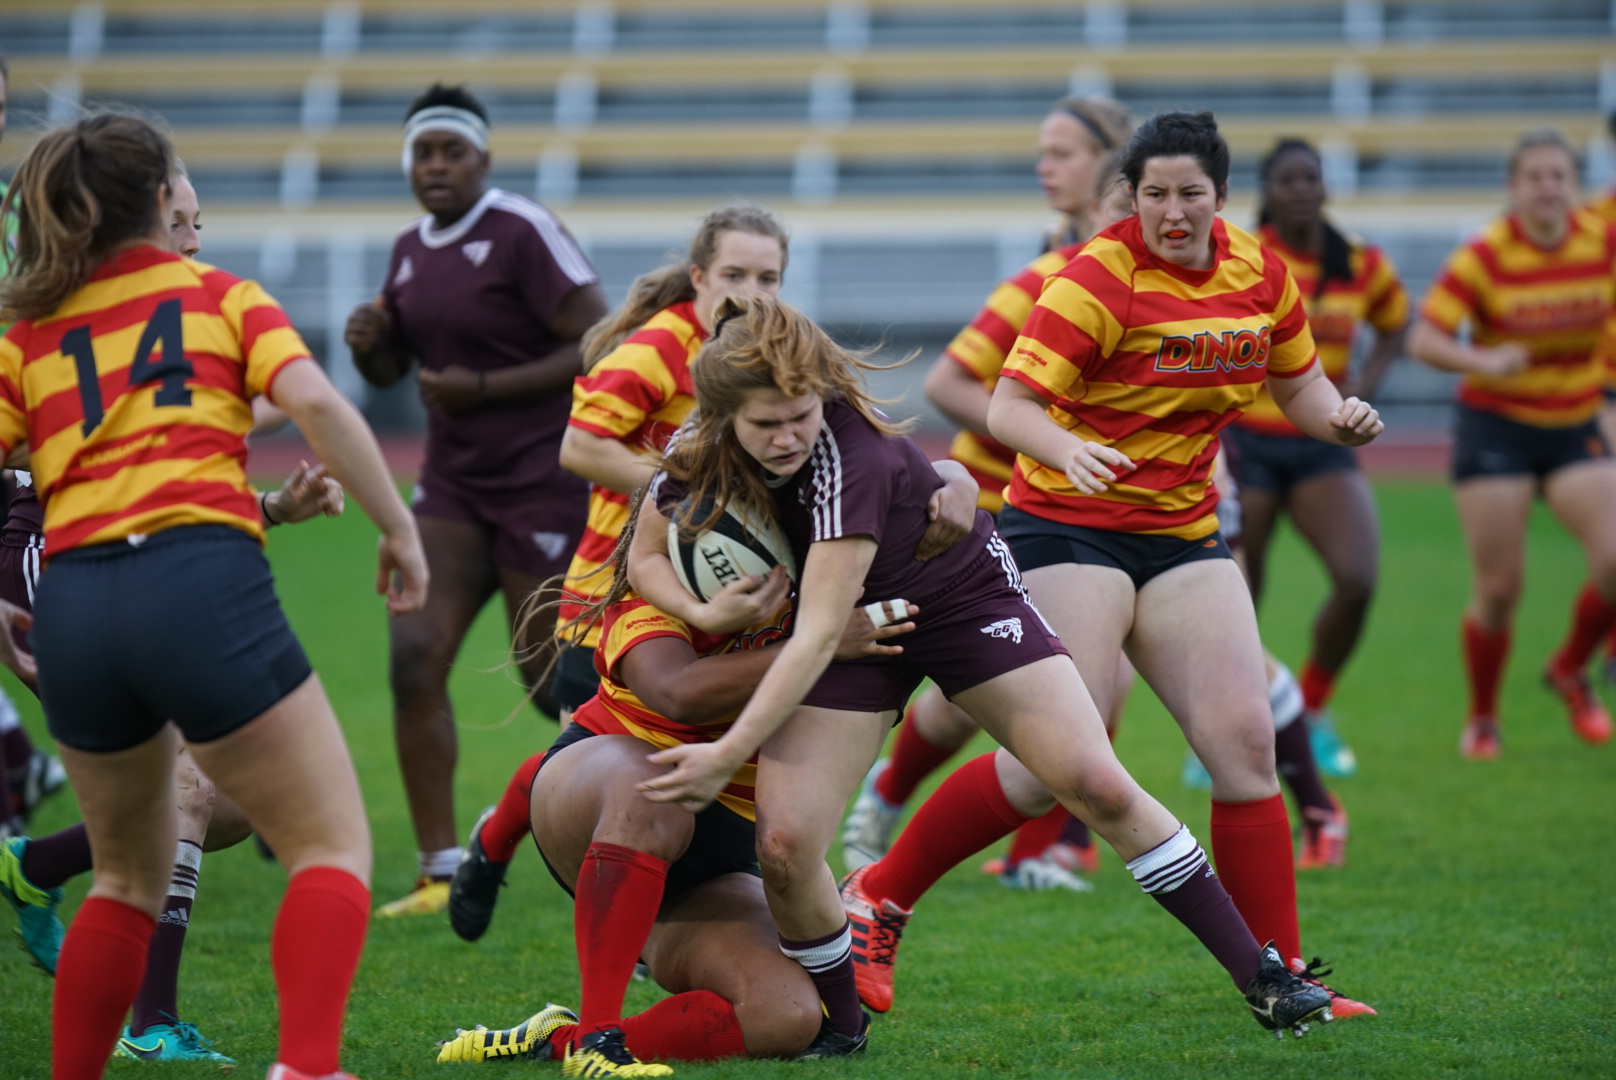 2016 Women’s Rugby Championship Semi-Final #1: Gee-Gees prevail in national semifinals after defensive battle with Dinos